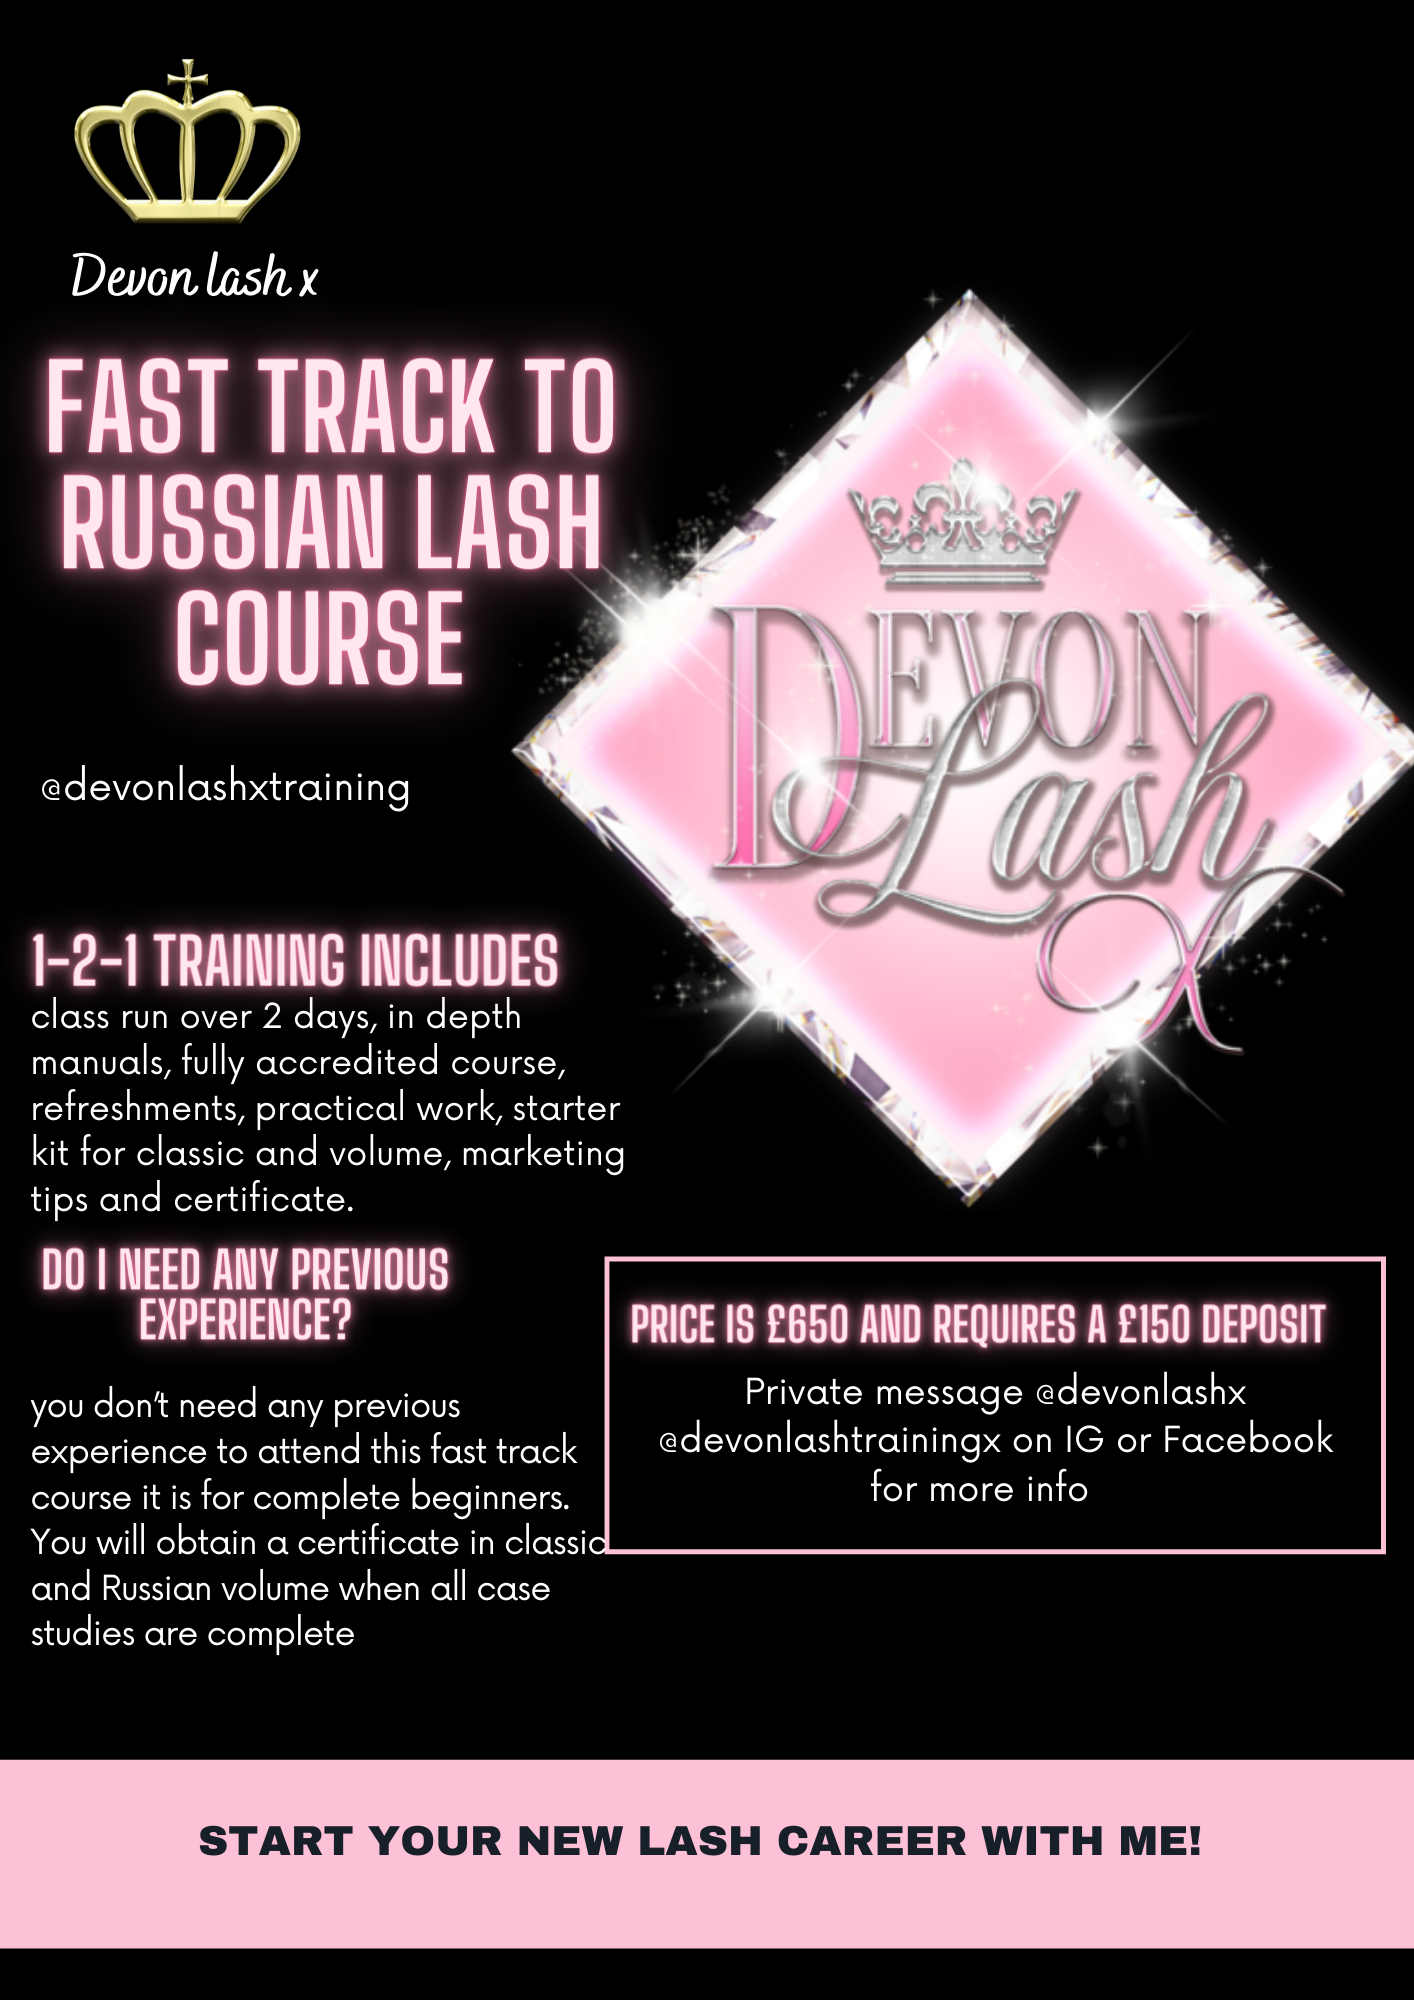 Fast track to Russian lash course 1-2-1